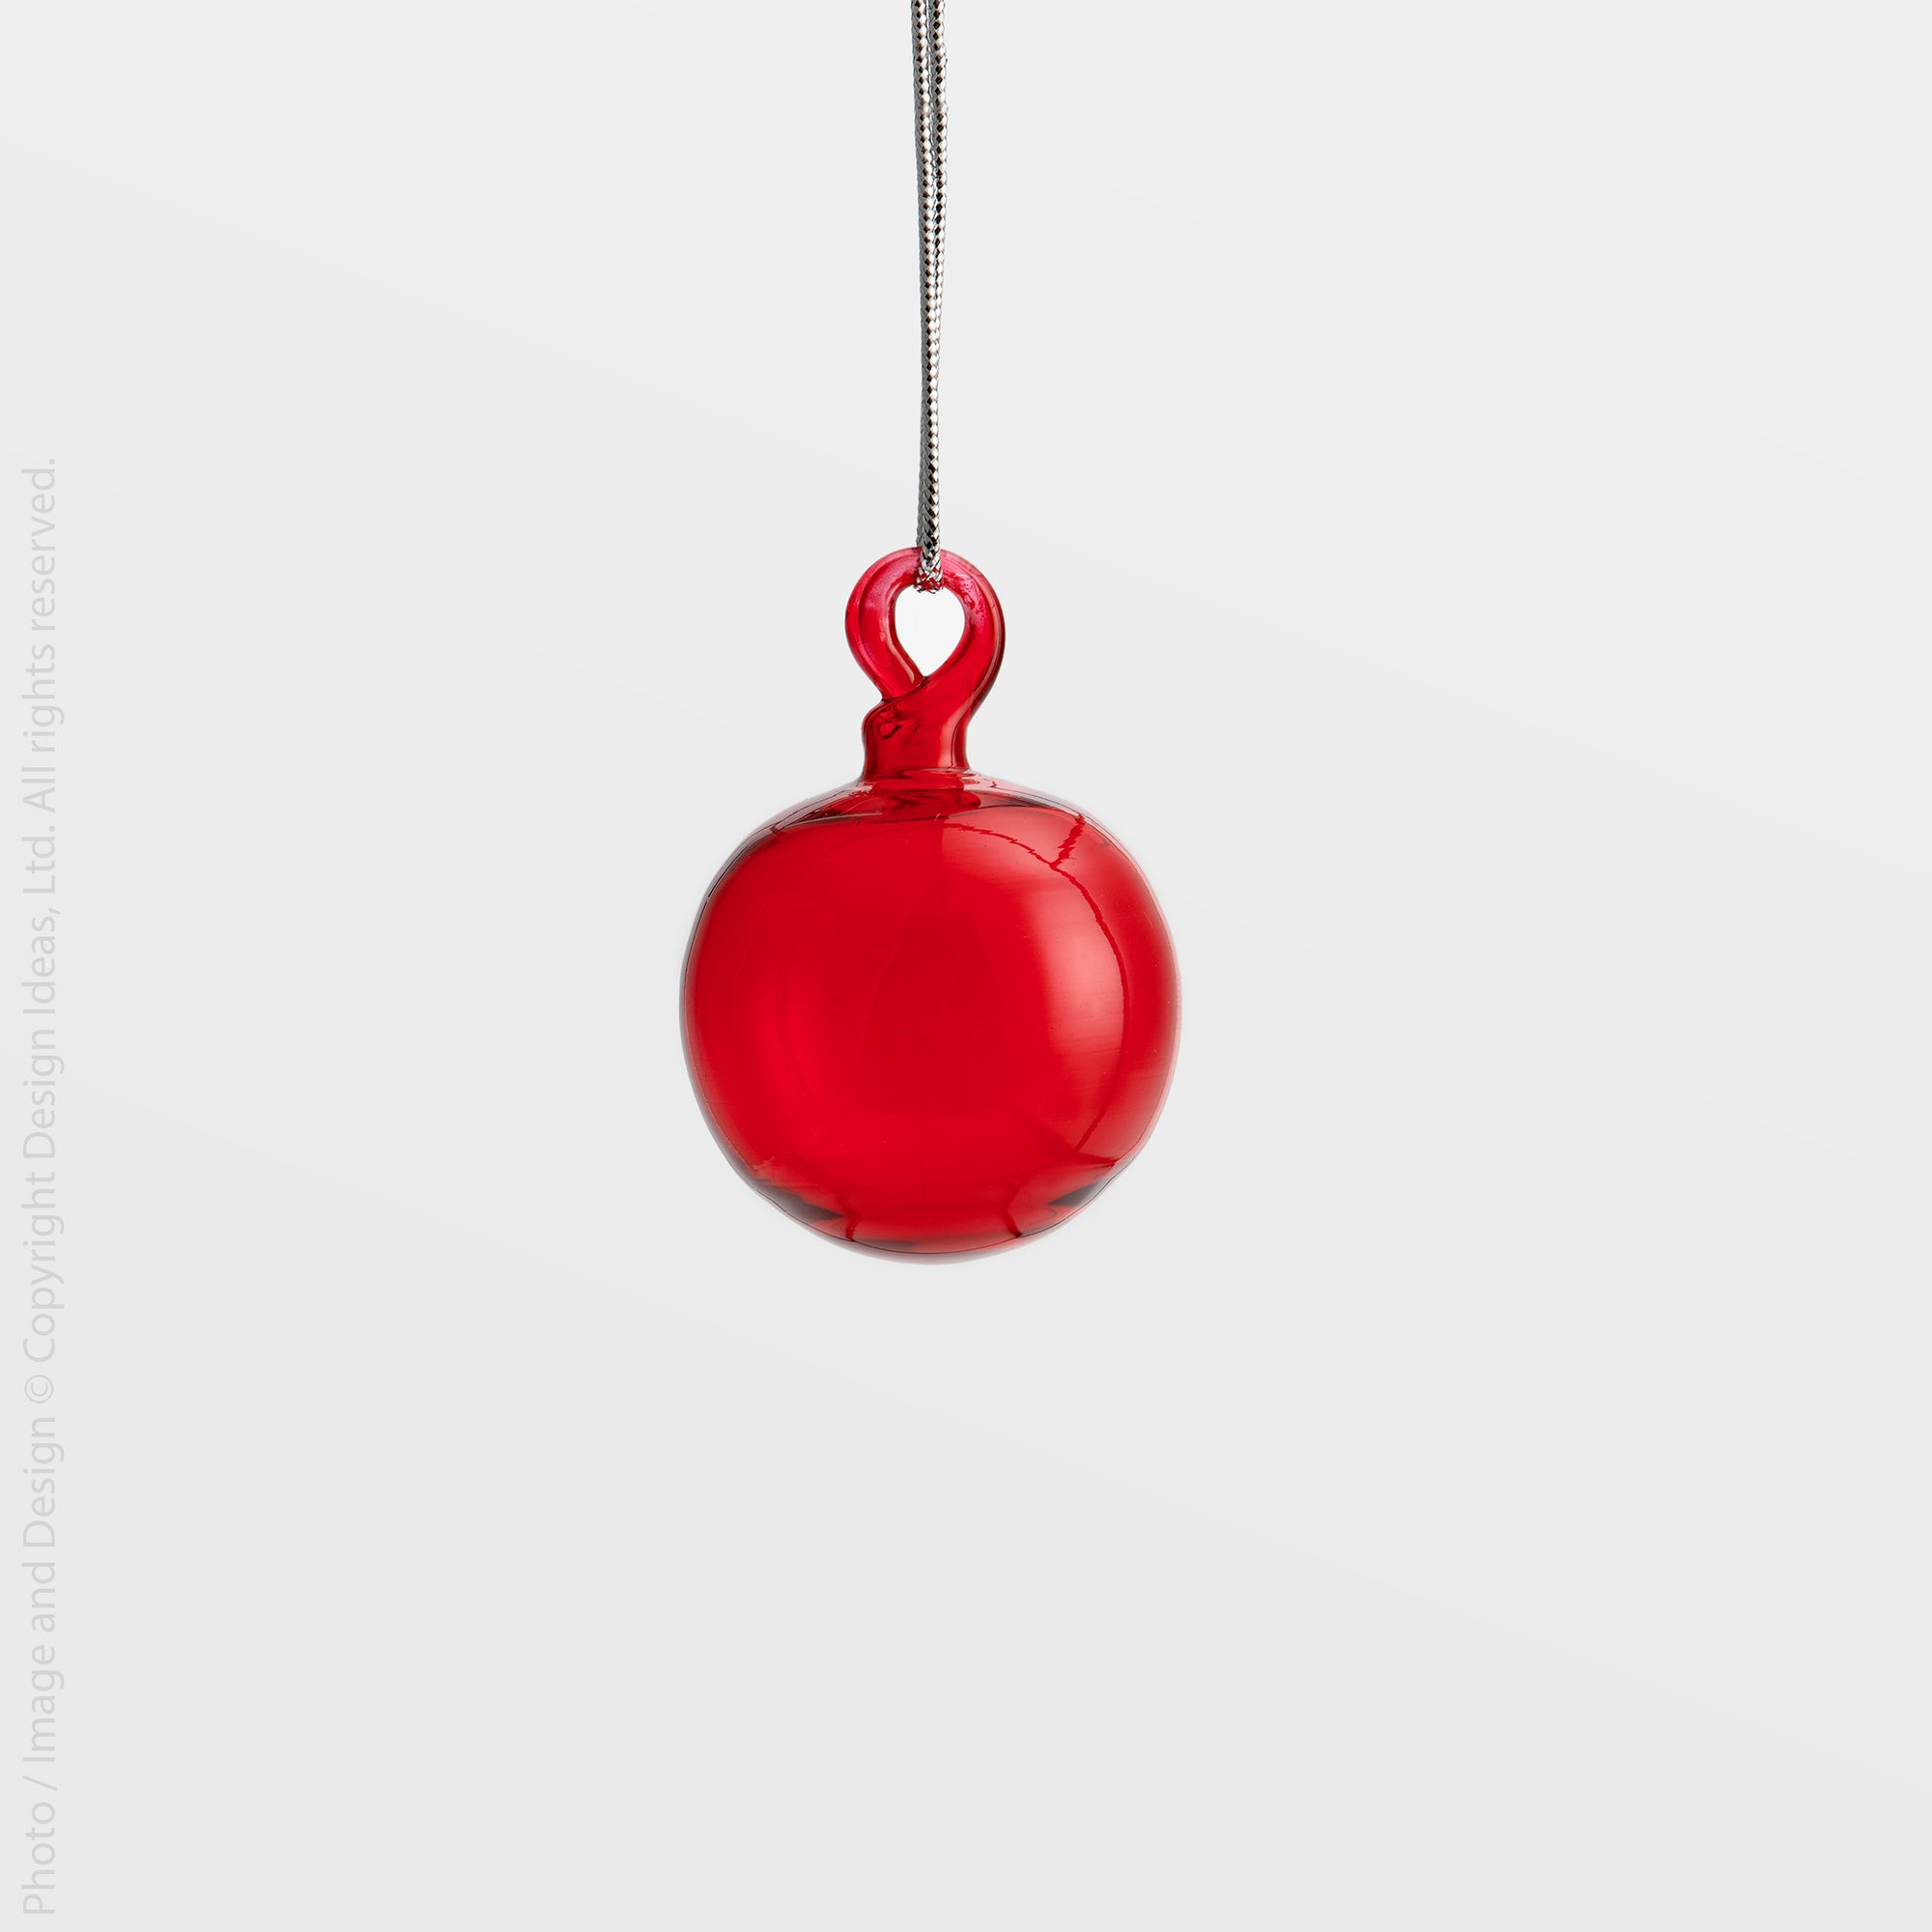 Moroah™ Mouth Blown Glass ornament (2 in.)